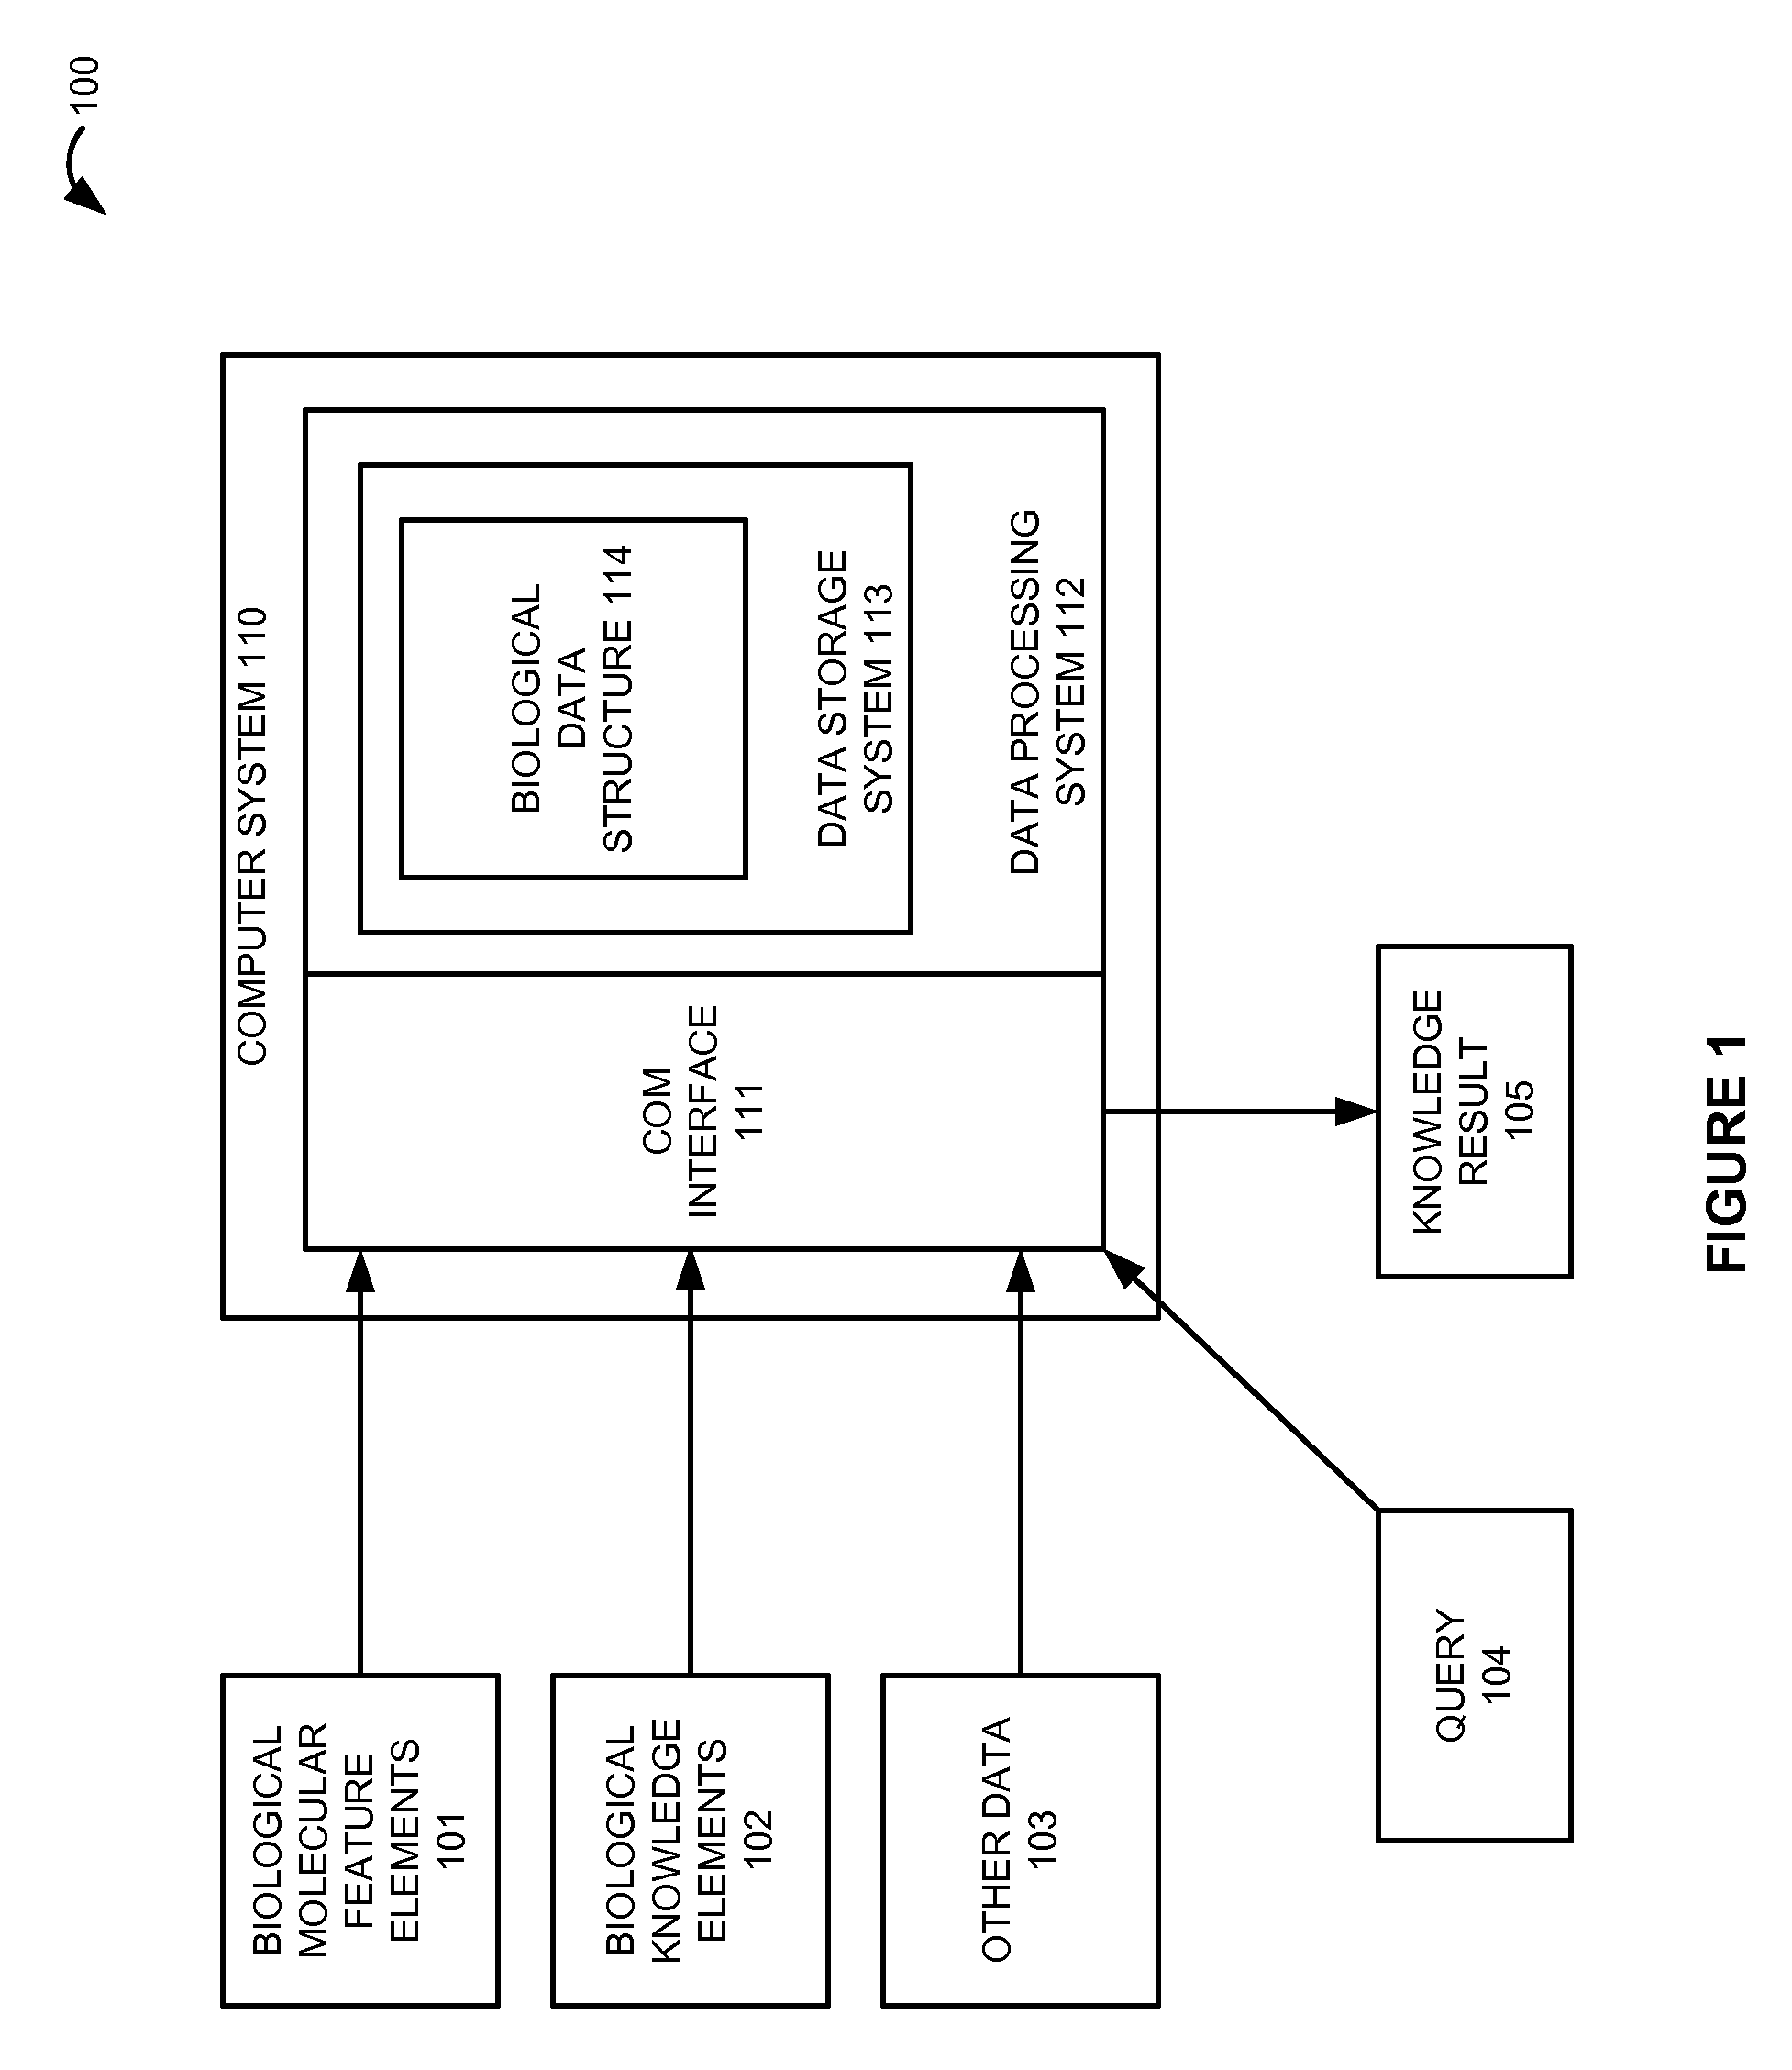 Biological data structure having multi-lateral, multi-scalar, and multi-dimensional relationships between molecular features and other data